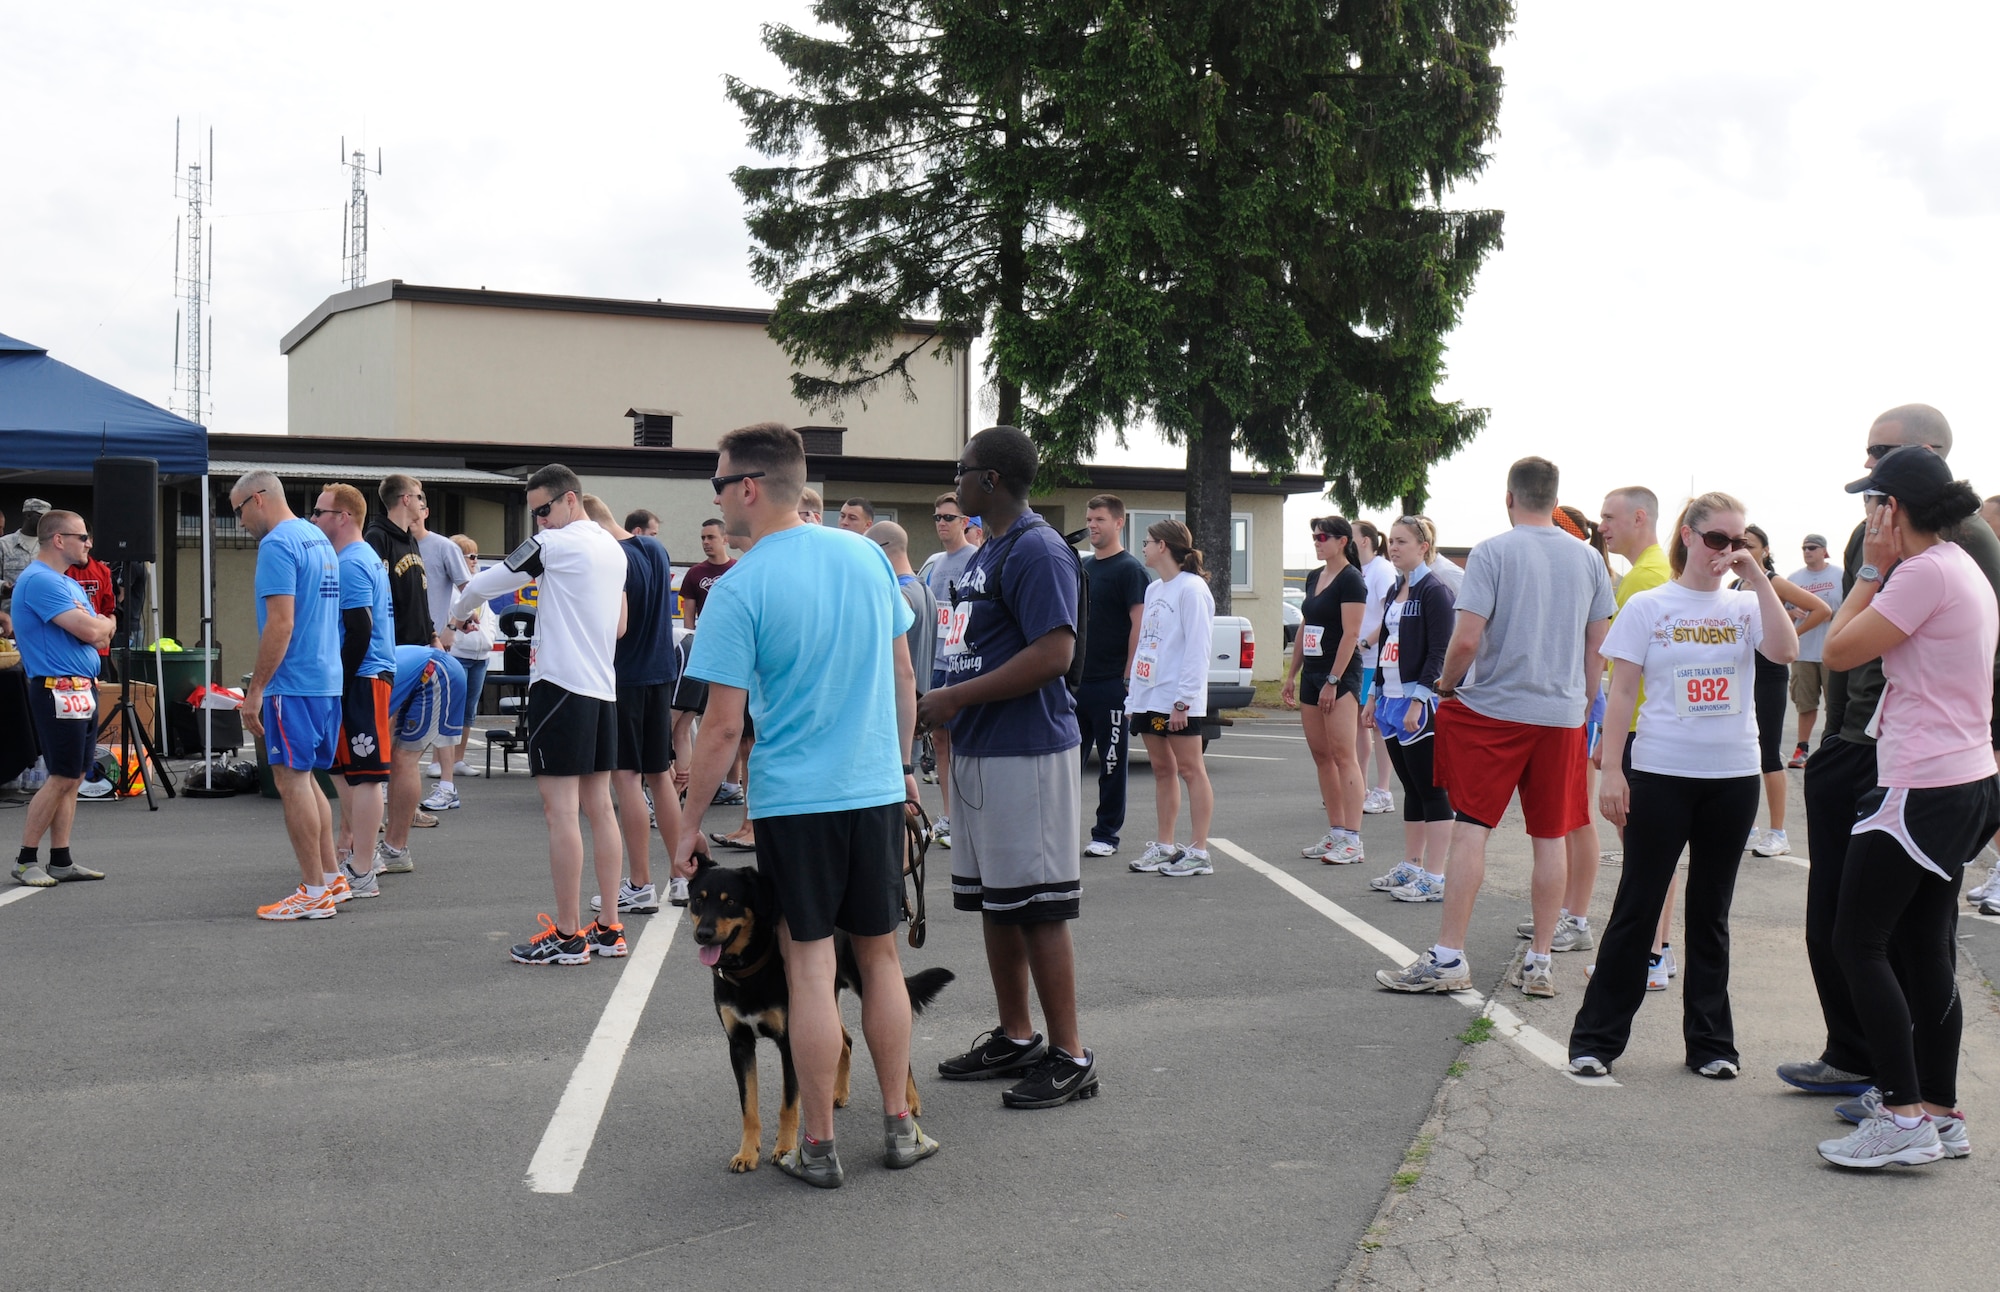 SPANGDAHLEM AIR BASE, Germany – Runners wait for the start of the 10K and U.S. Air Forces in Europe half marathon to begin here in the parking lot next to the Skelton Memorial Fitness Center May 14. The USAFE half marathon is an annual event Airmen from around Europe can participate in. Each run offered were split into different categories based on age and gender. (U.S. Air Force photo/Airman 1st Class Brittney Frees)